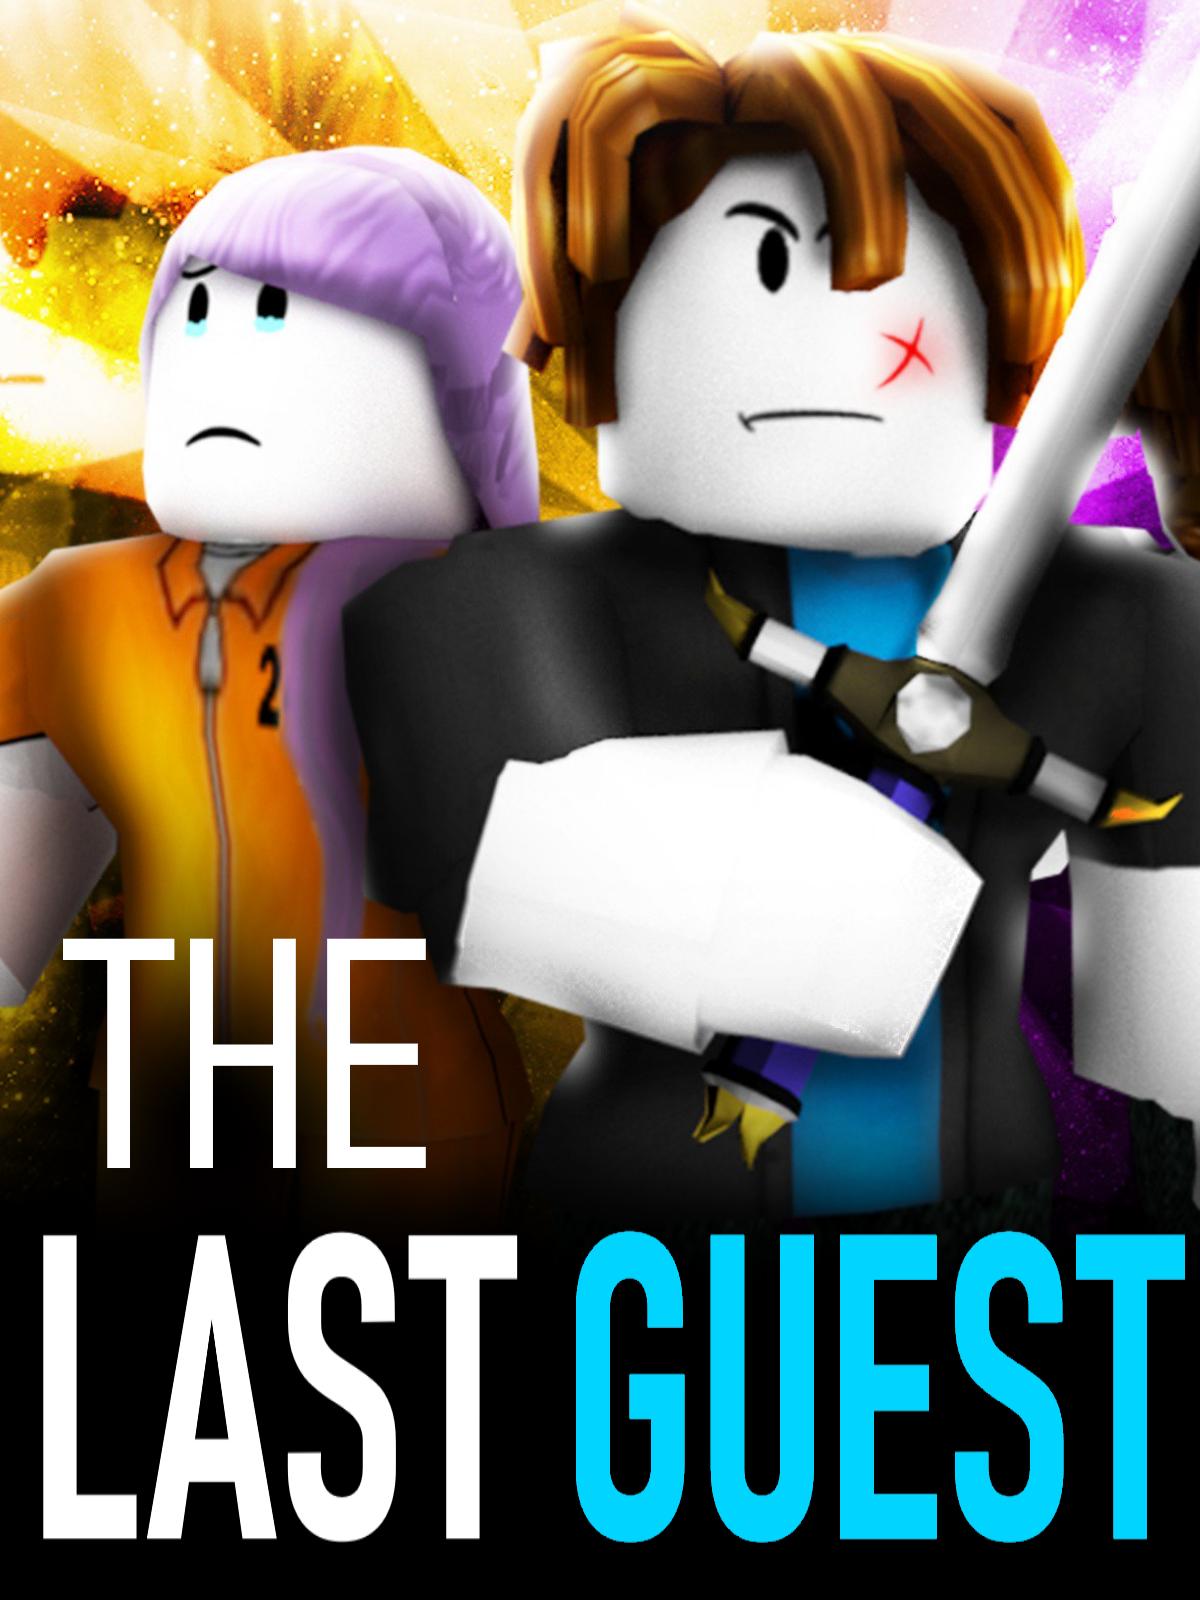 Guest 2005 Face. - Roblox